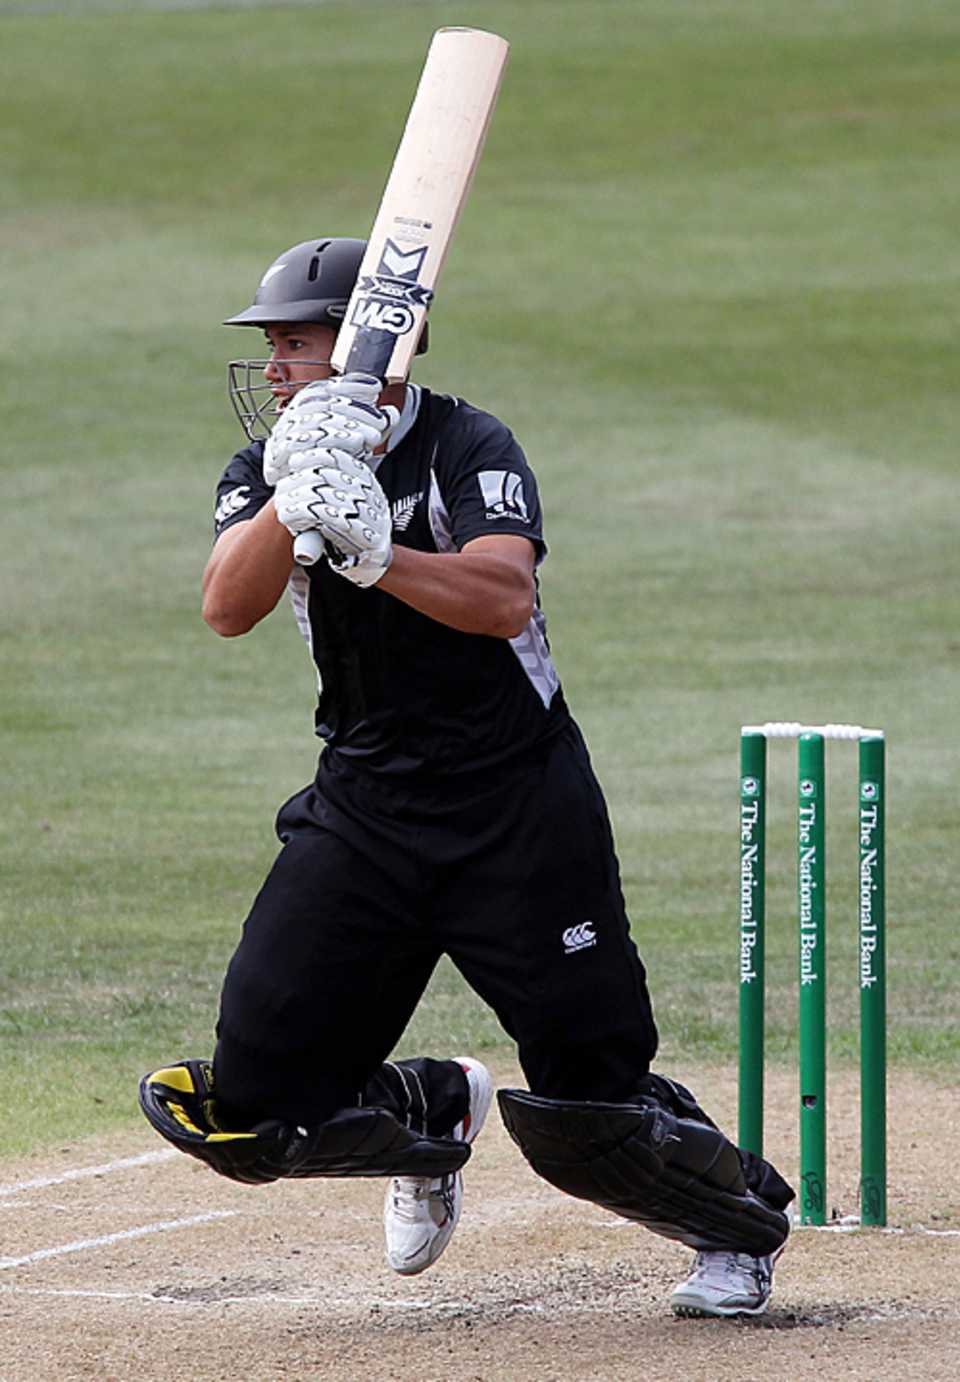 Ross Taylor's innings set New Zealand on their way